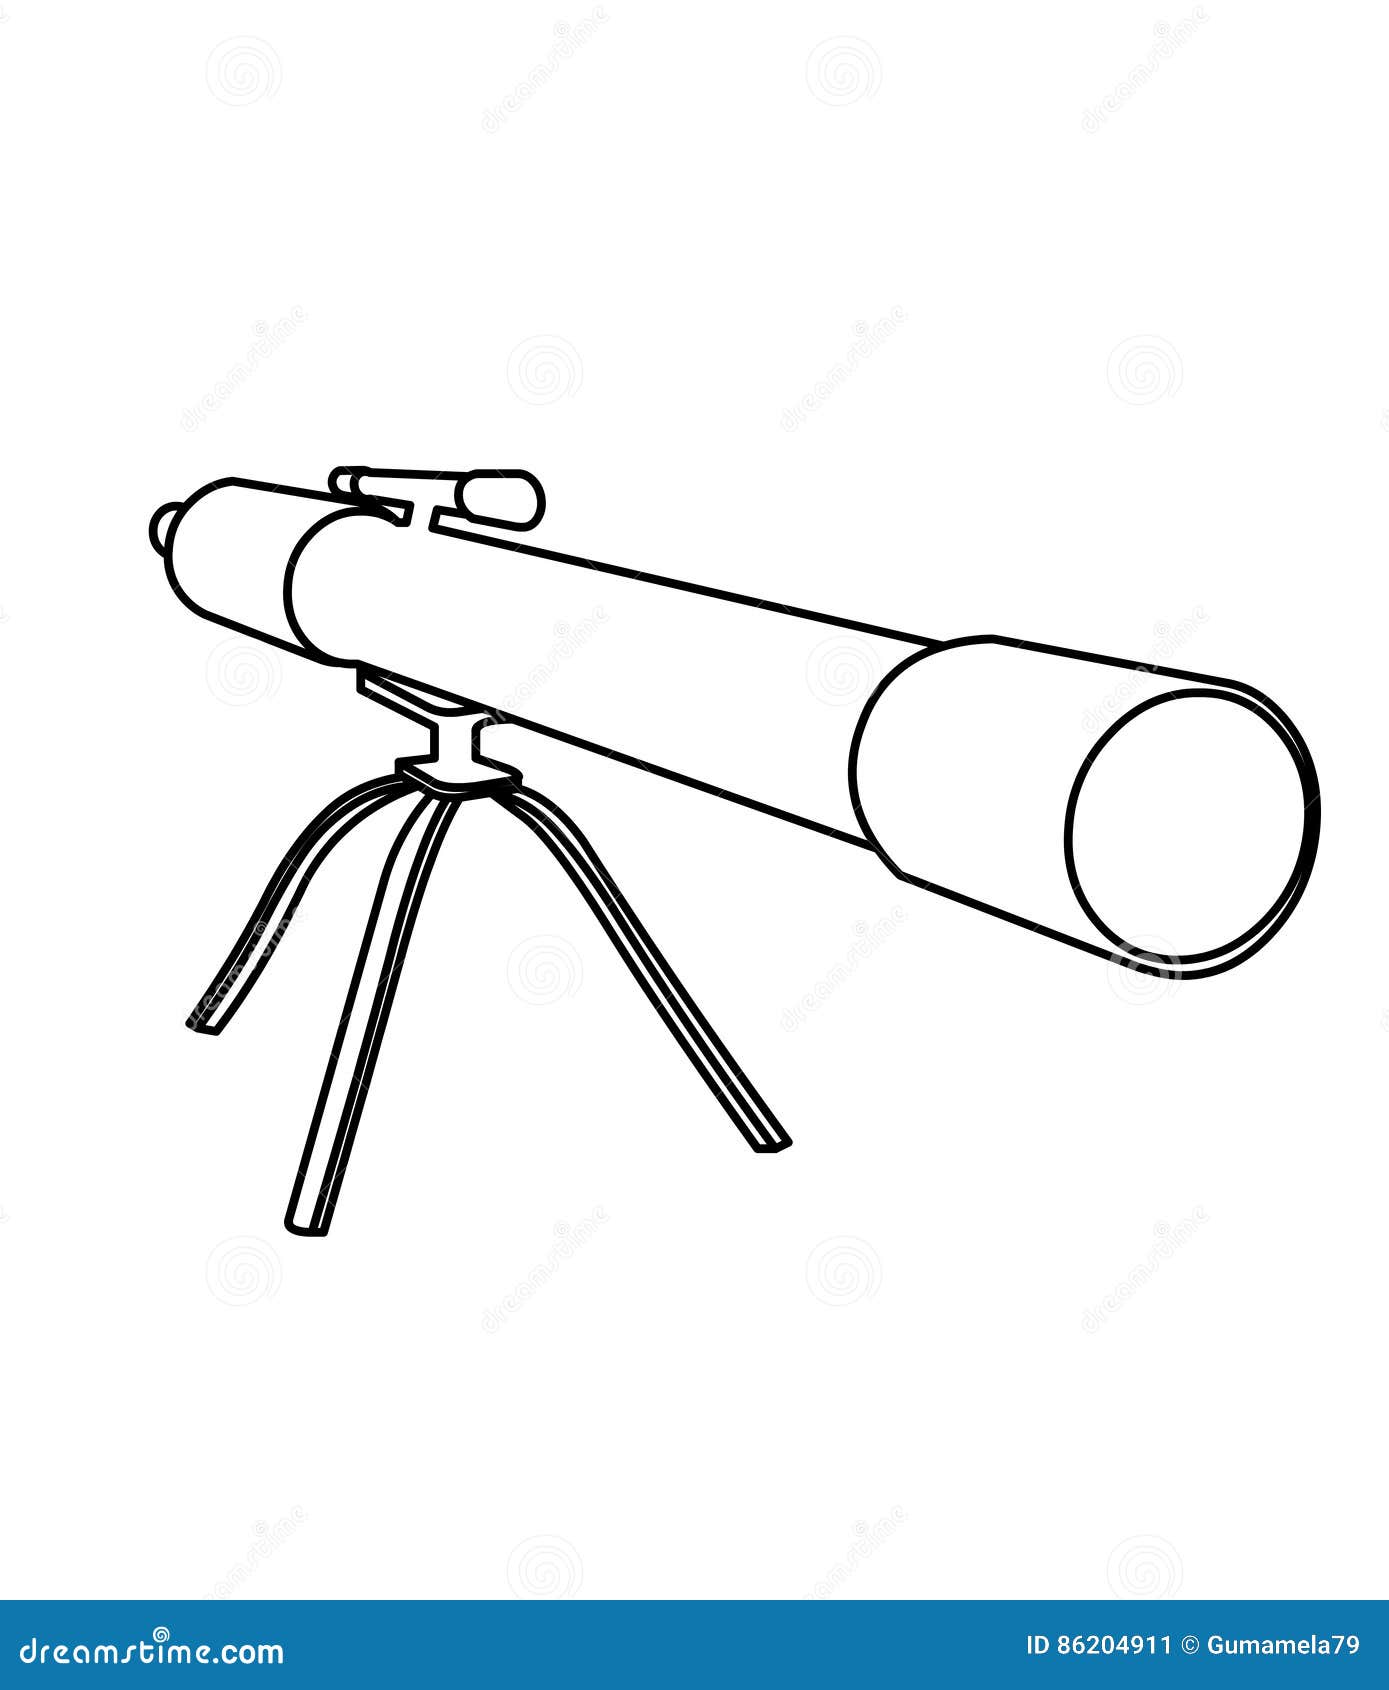 Download Telescope coloring page stock illustration. Illustration of elementary - 86204911